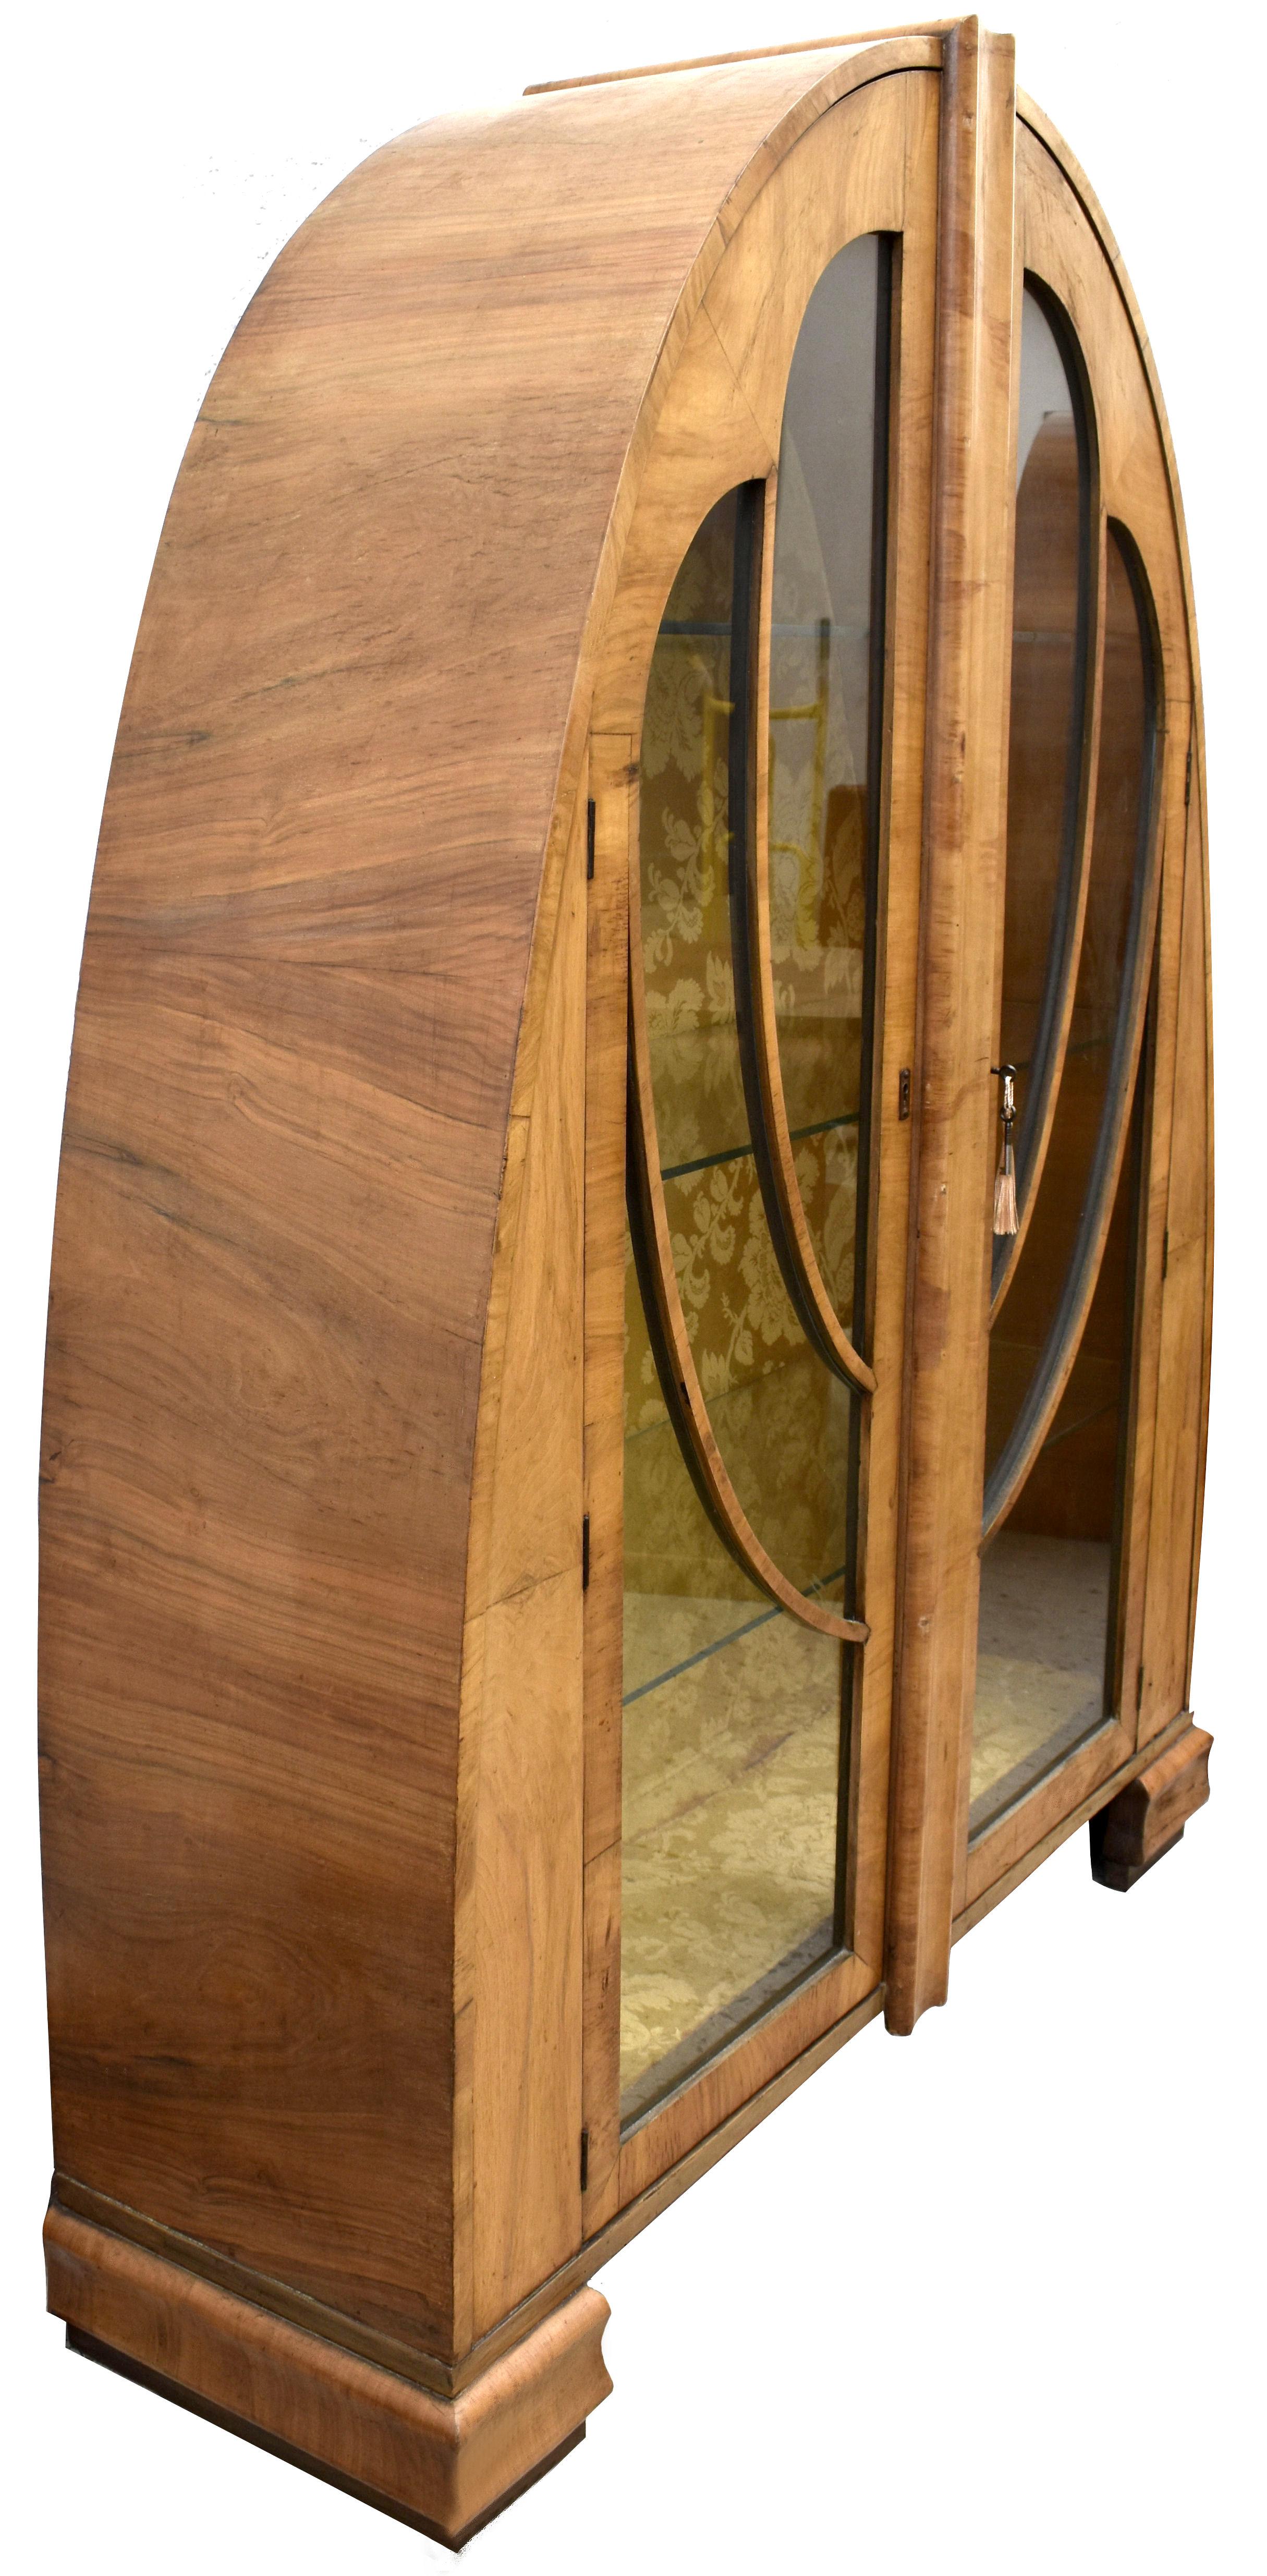 For your consideration is this rare and totally original 1930s Art Deco English walnut display cabinet. A gorgeous piece of furniture that's veneered in figured mid tone walnut with astragal glazed doors. Still retains its original silk interior